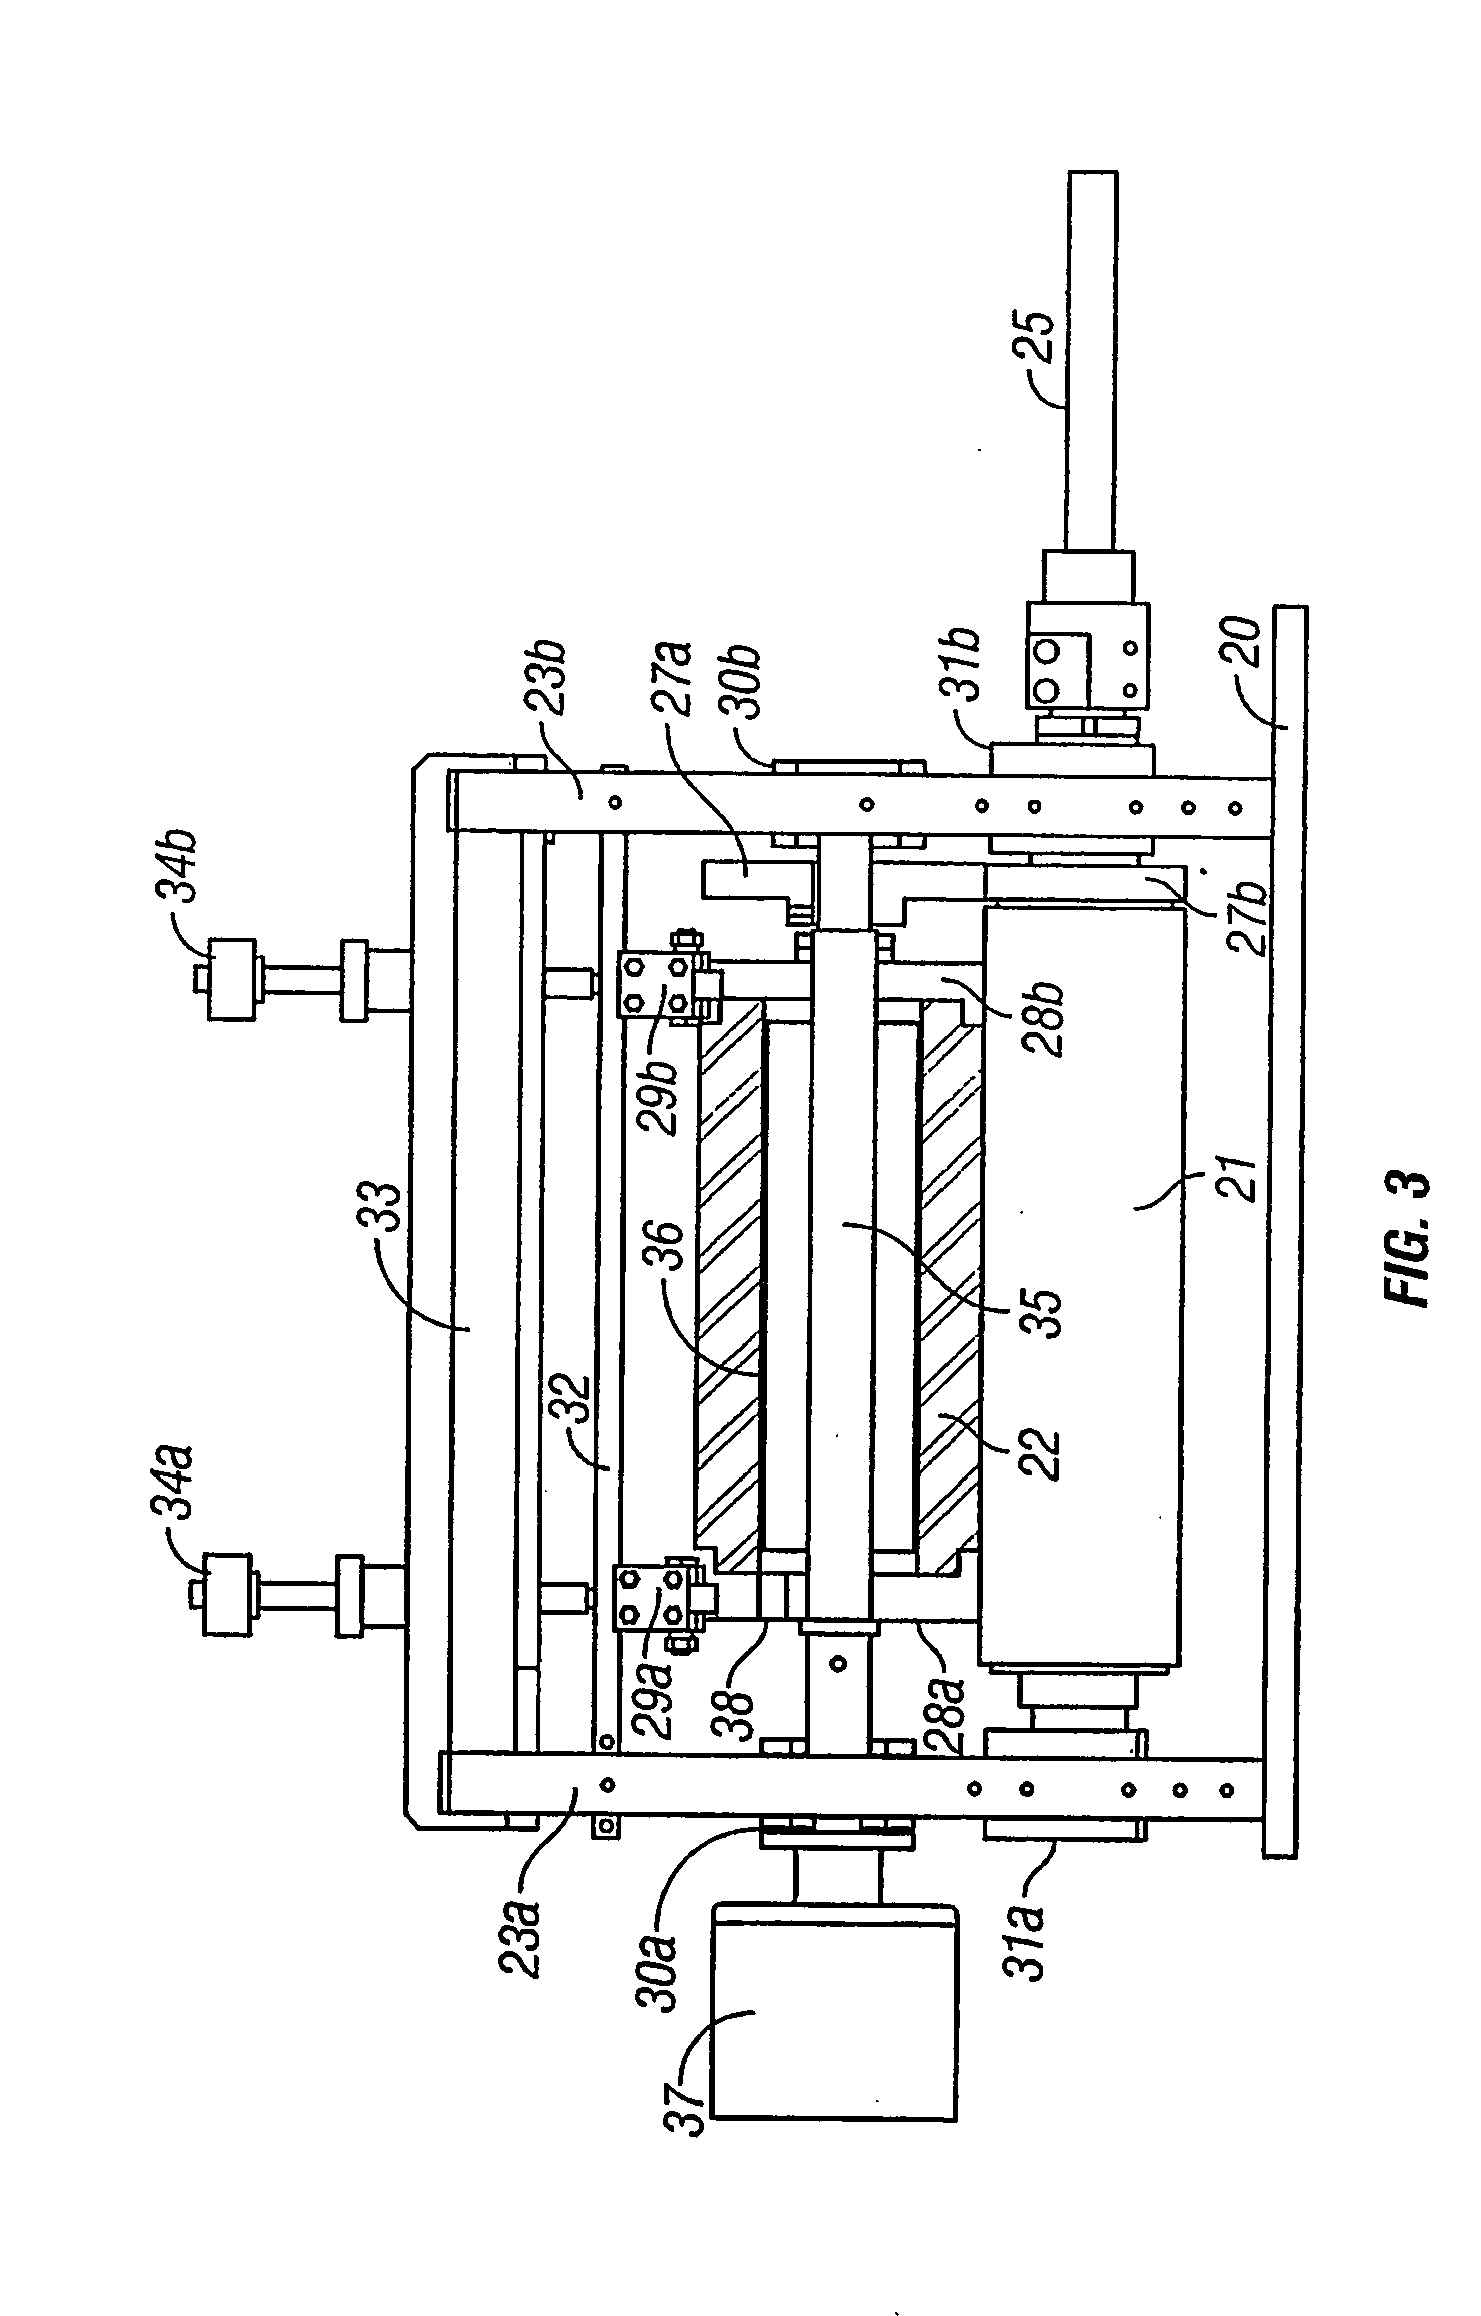 Apparatus for producing scored lines in a film